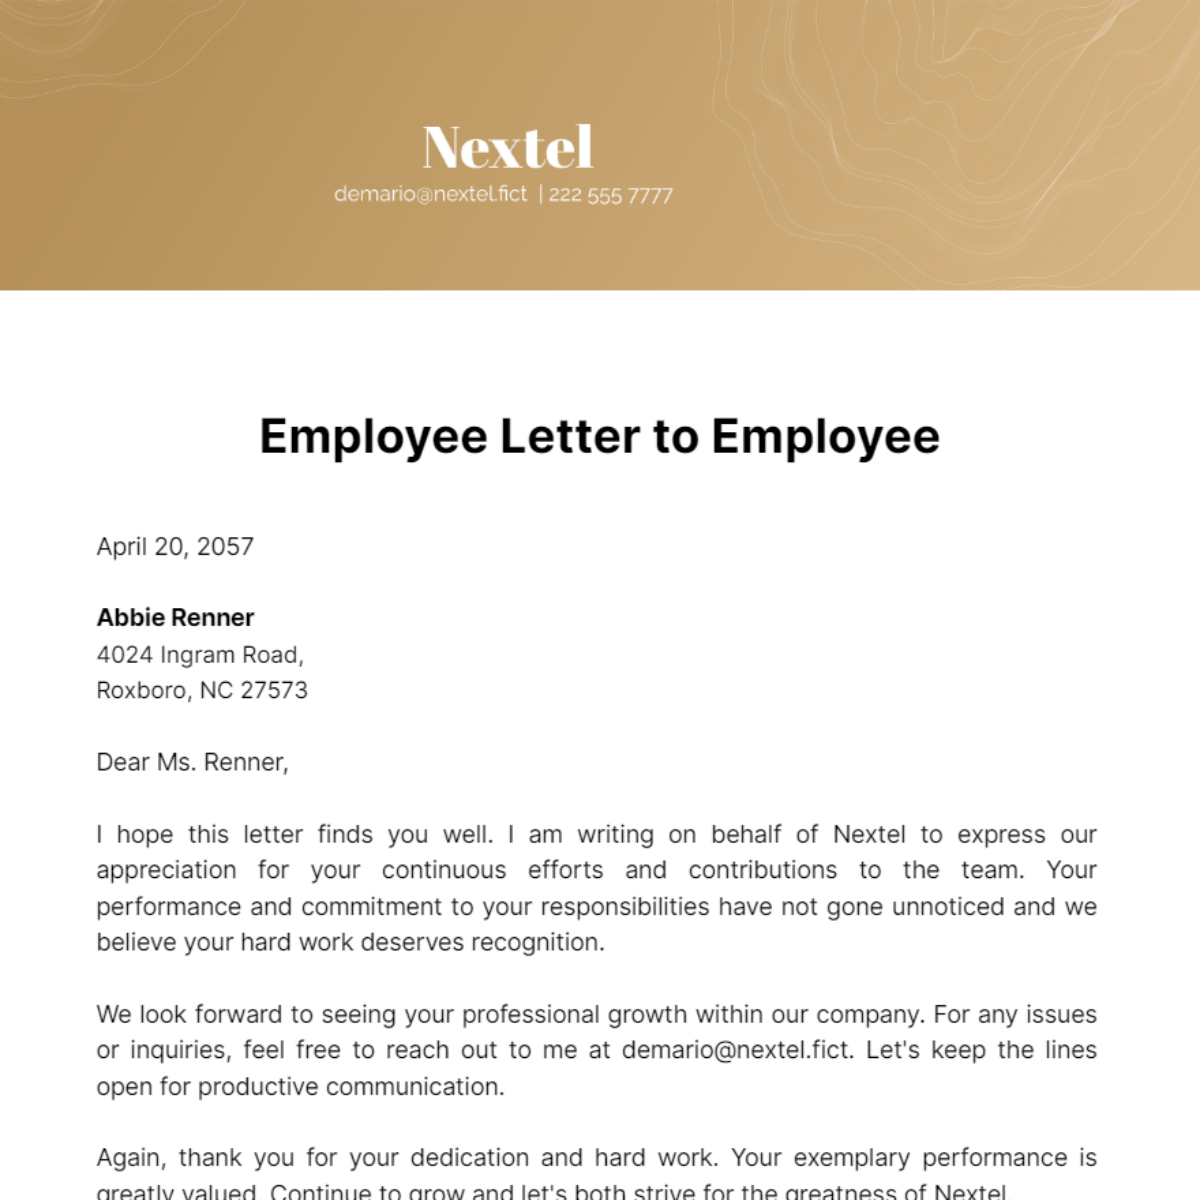 Employee Letter to Employee Template